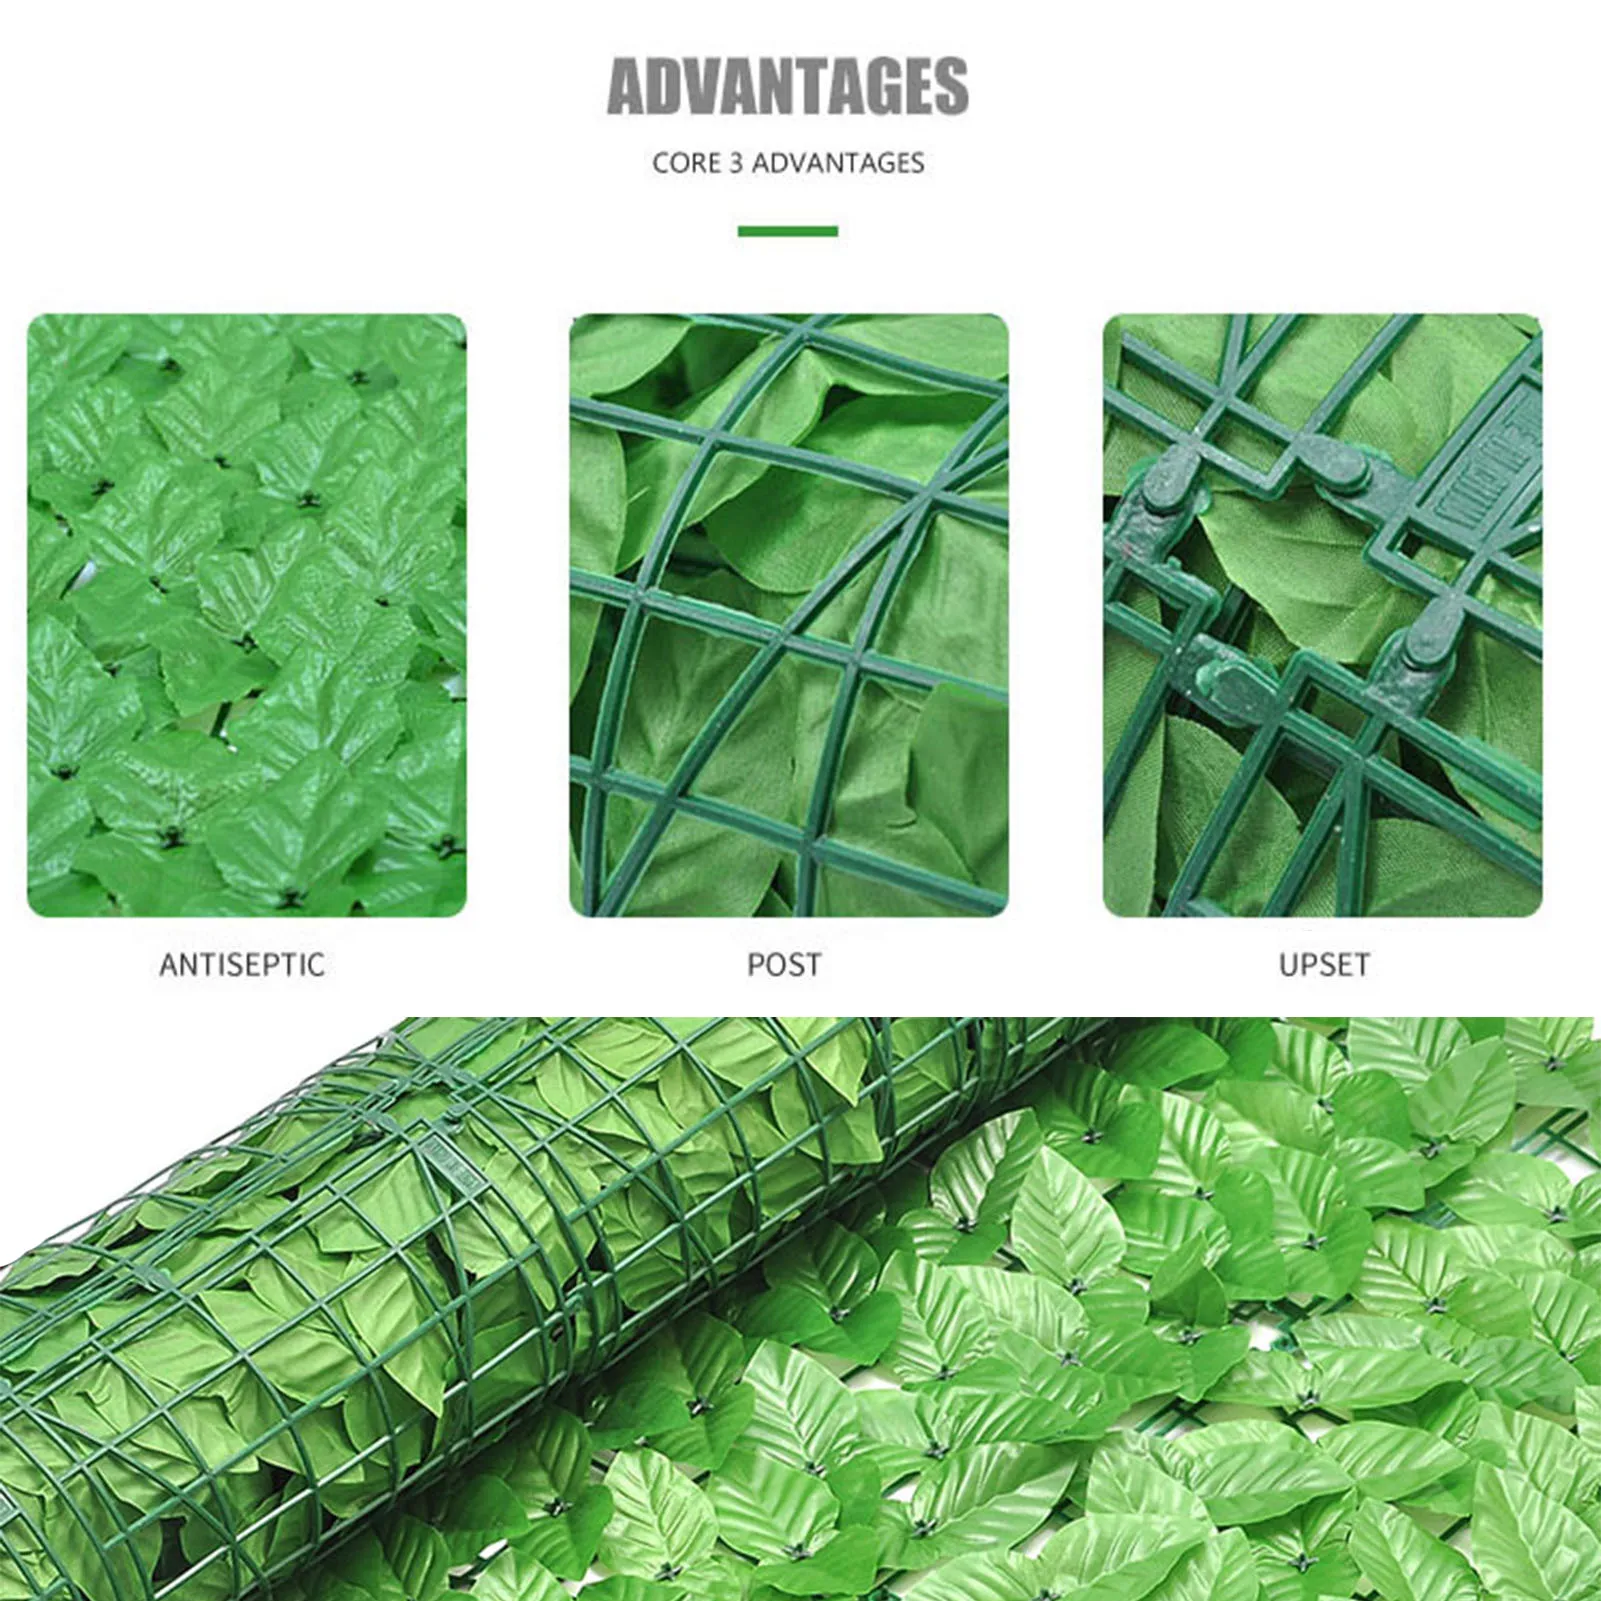 

1x3m Artificial Ivy Leaf Hedge Screening Green Leaf Privacy Fence Screening Roll UV Fade Protected Privacy Artificial Fence